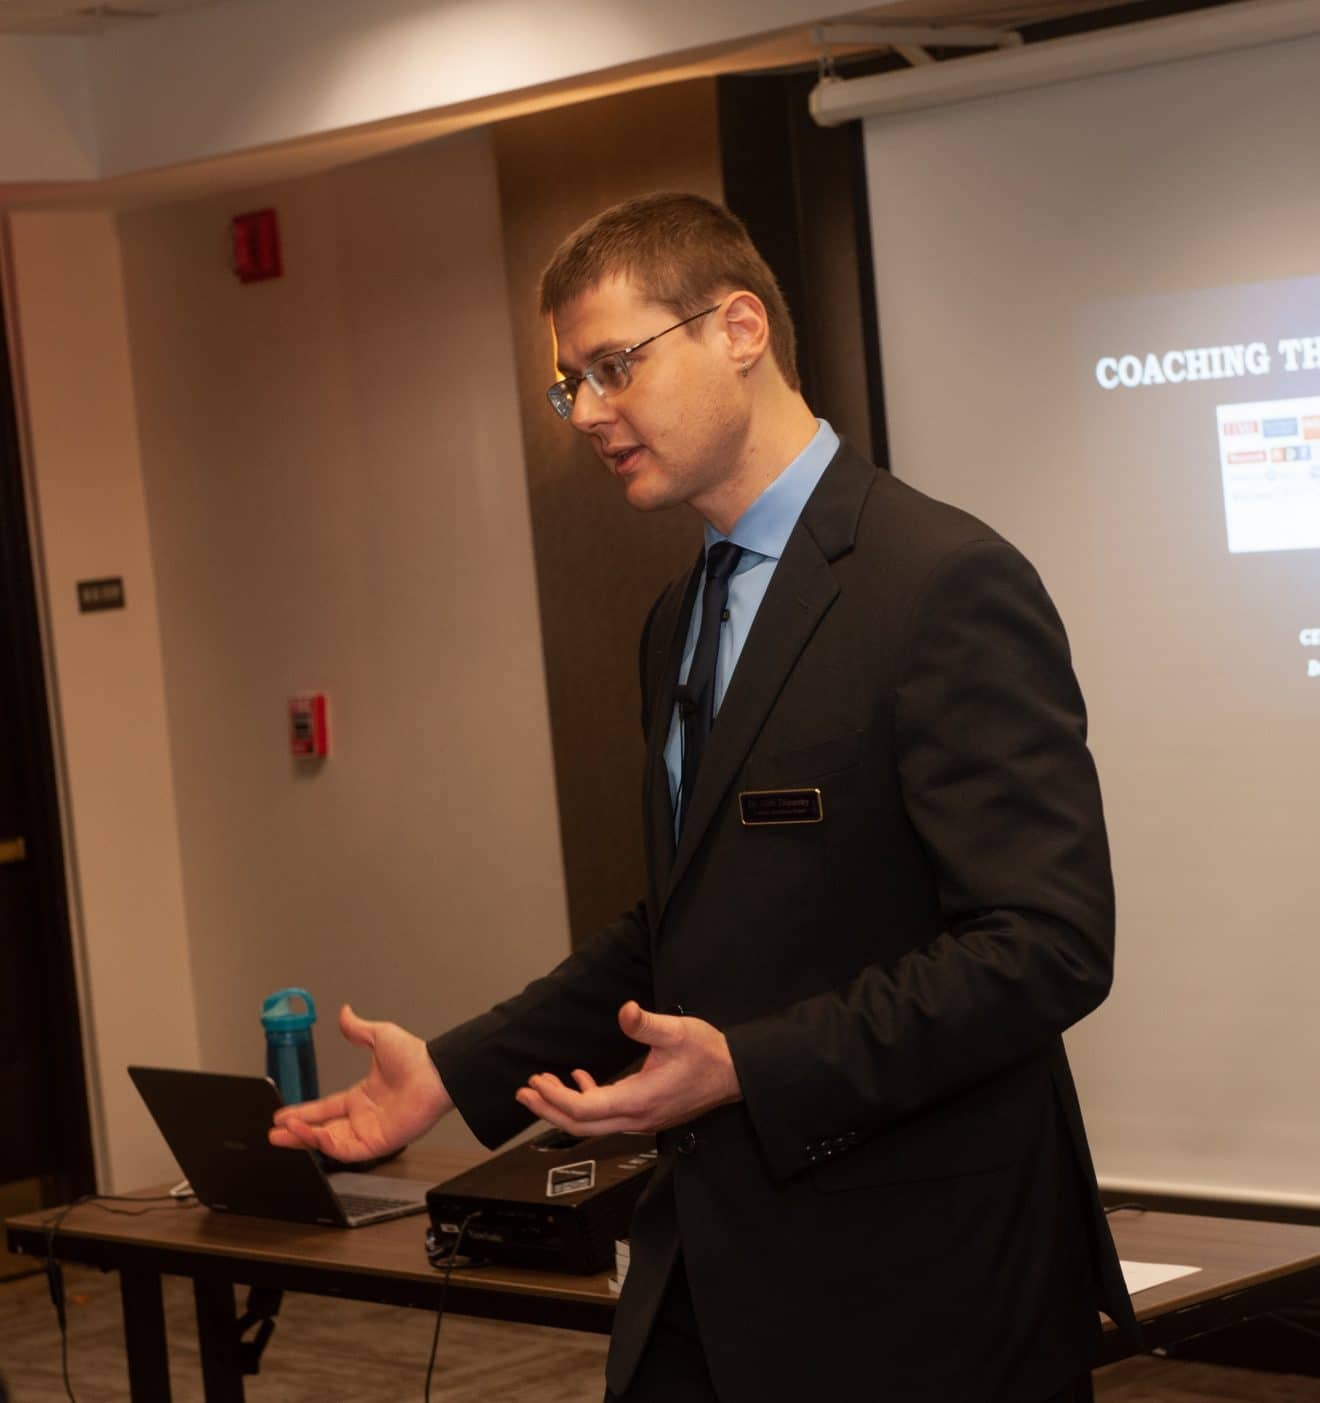 Dr. Gleb Tsipursky speaking at an event in the USA